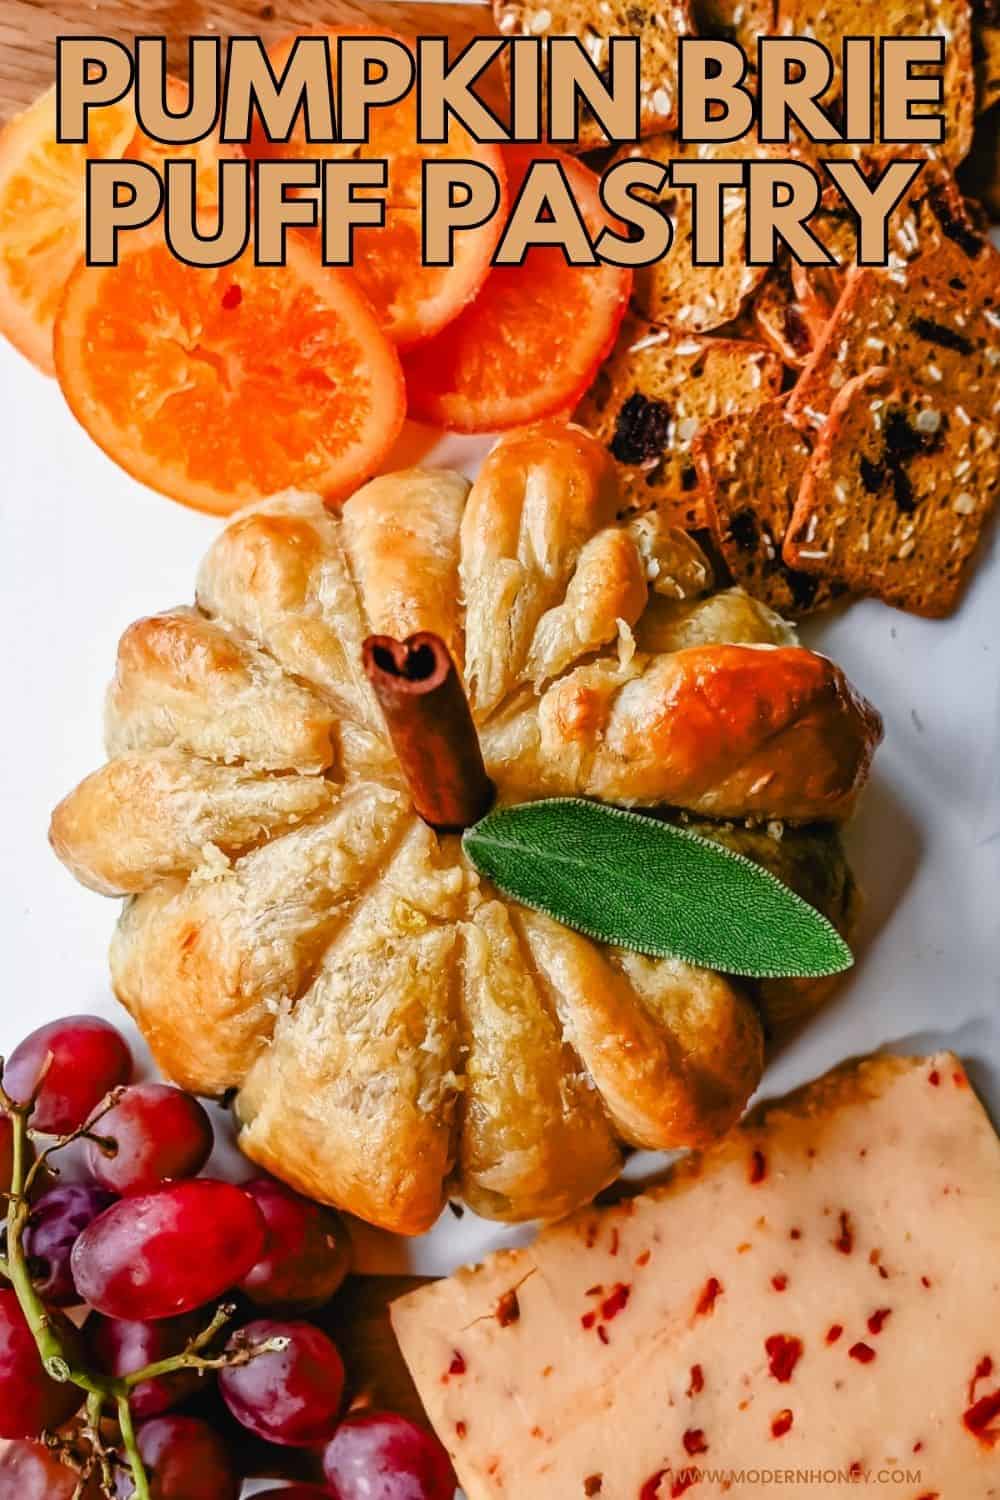 Pumpkin Shaped Baked Brie Puff Pastry. This festive Fall Pumpkin Baked Brie is the perfect appetizer or centerpiece for your charcuterie board. Flaky puff pastry baked with creamy brie cheese and pumpkin butter or fig jam is the perfect salty sweet combination.